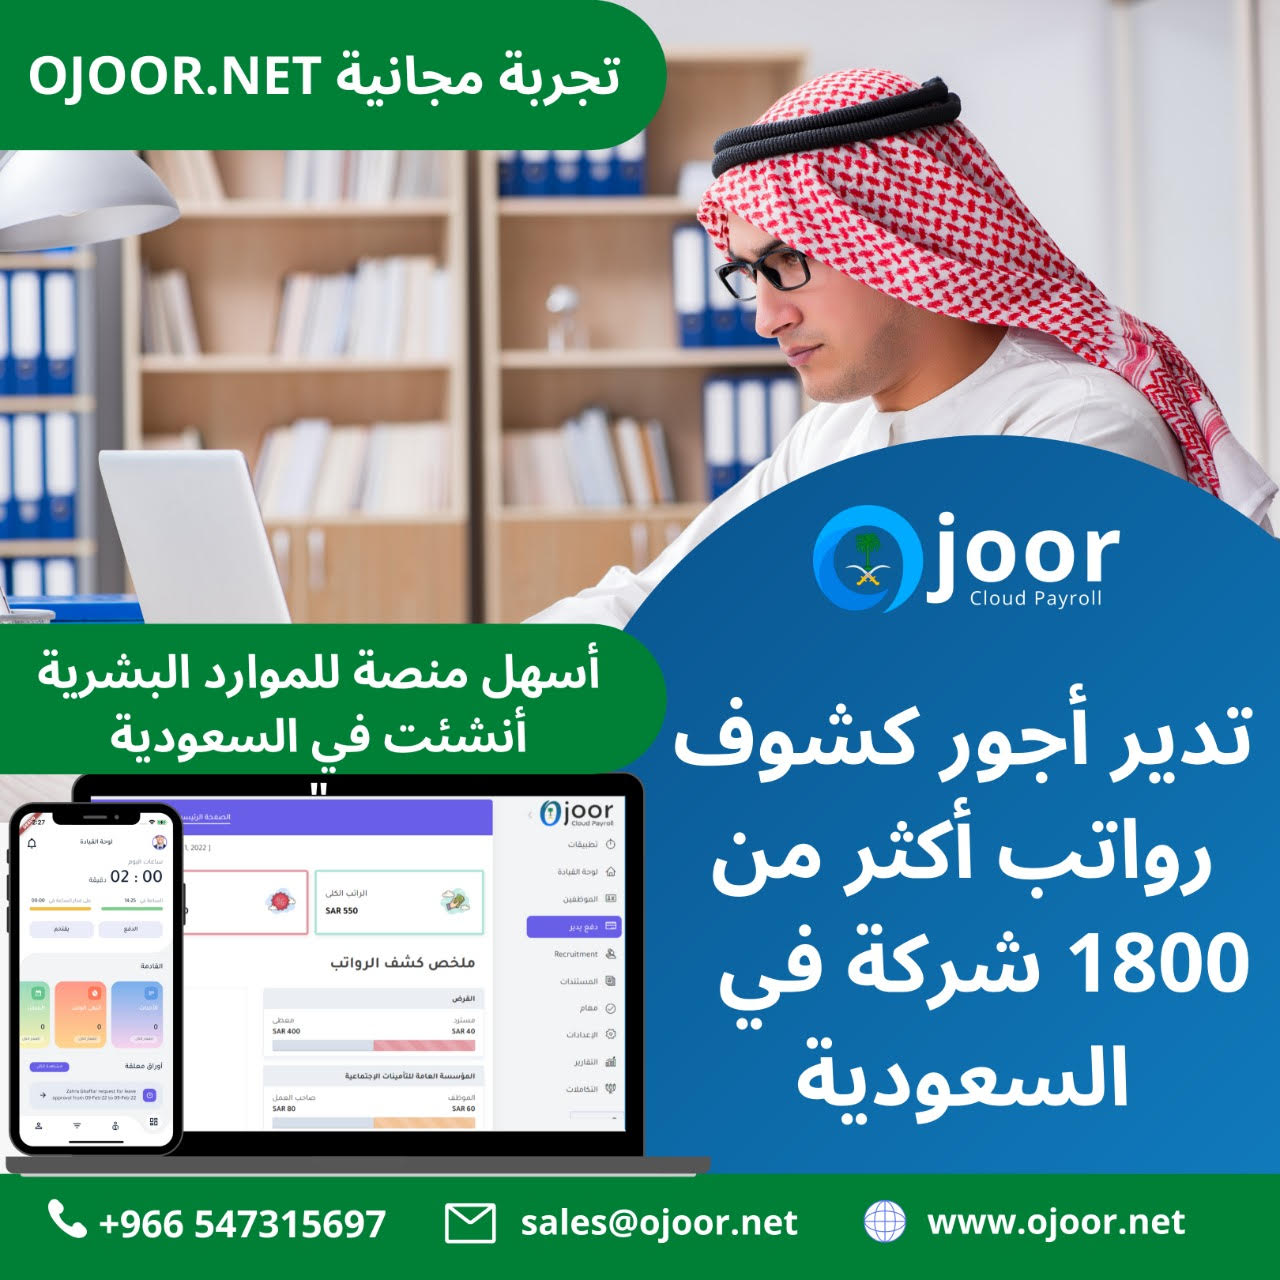 Which Payroll System in Saudi Arabia is available for business?